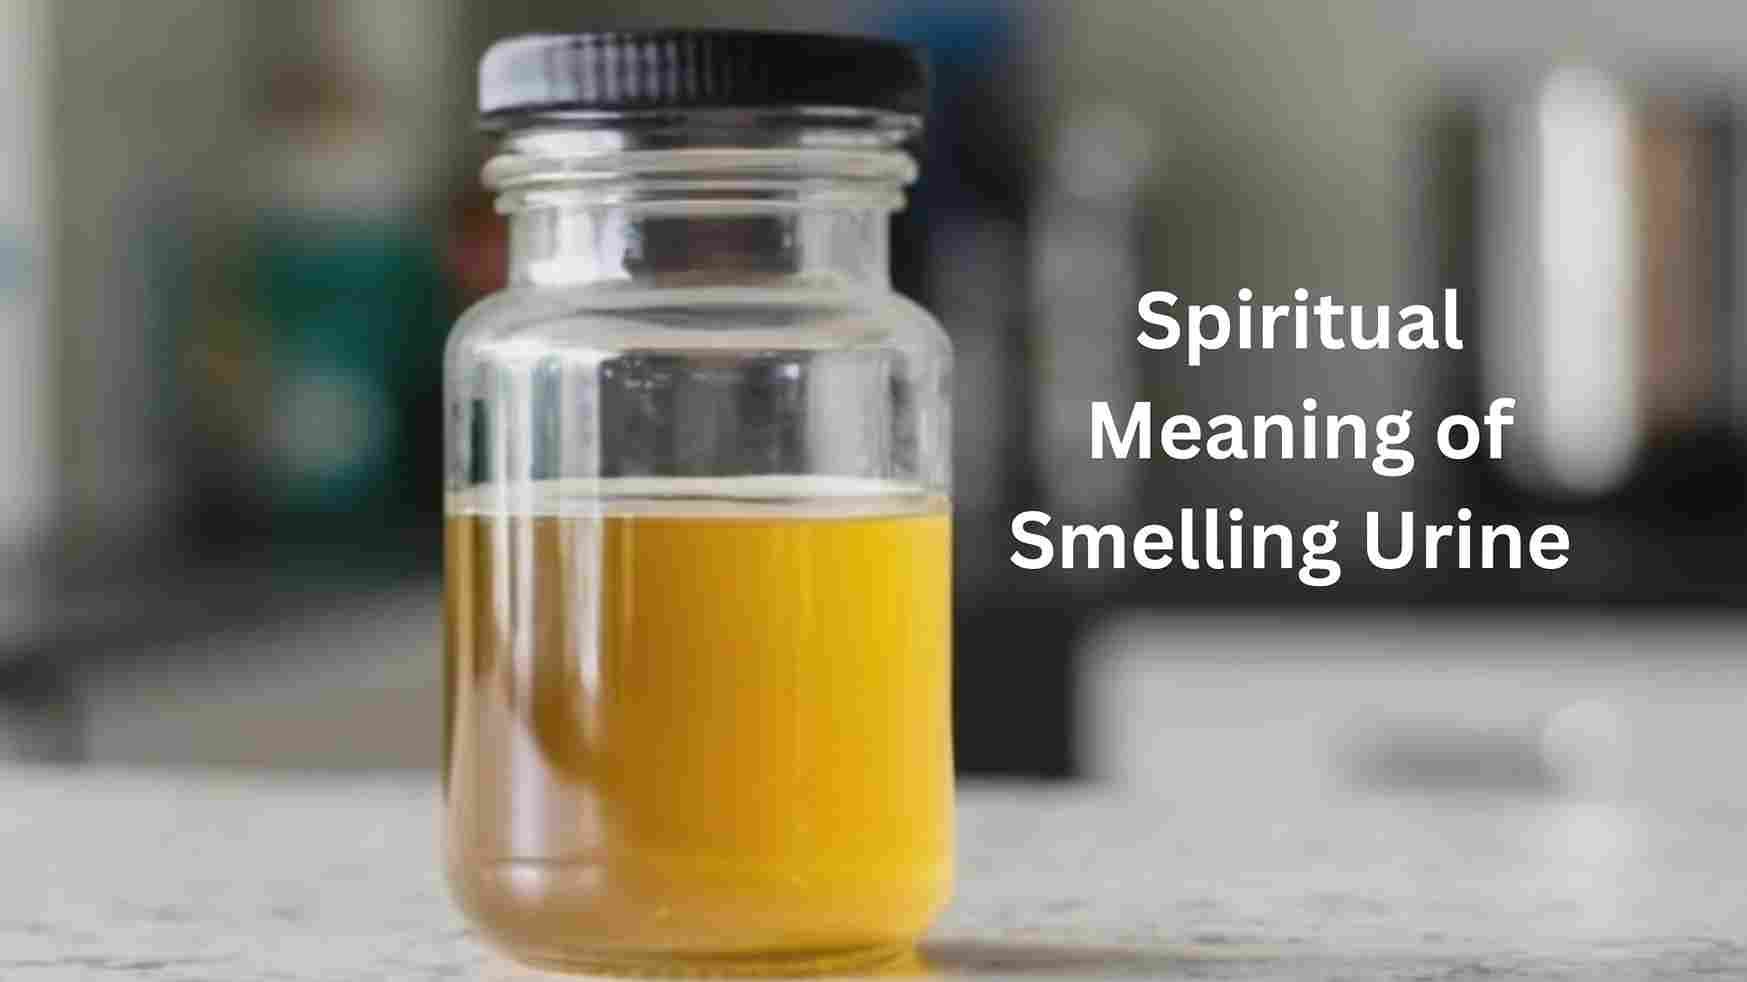 Spiritual Meaning of Smelling Urine